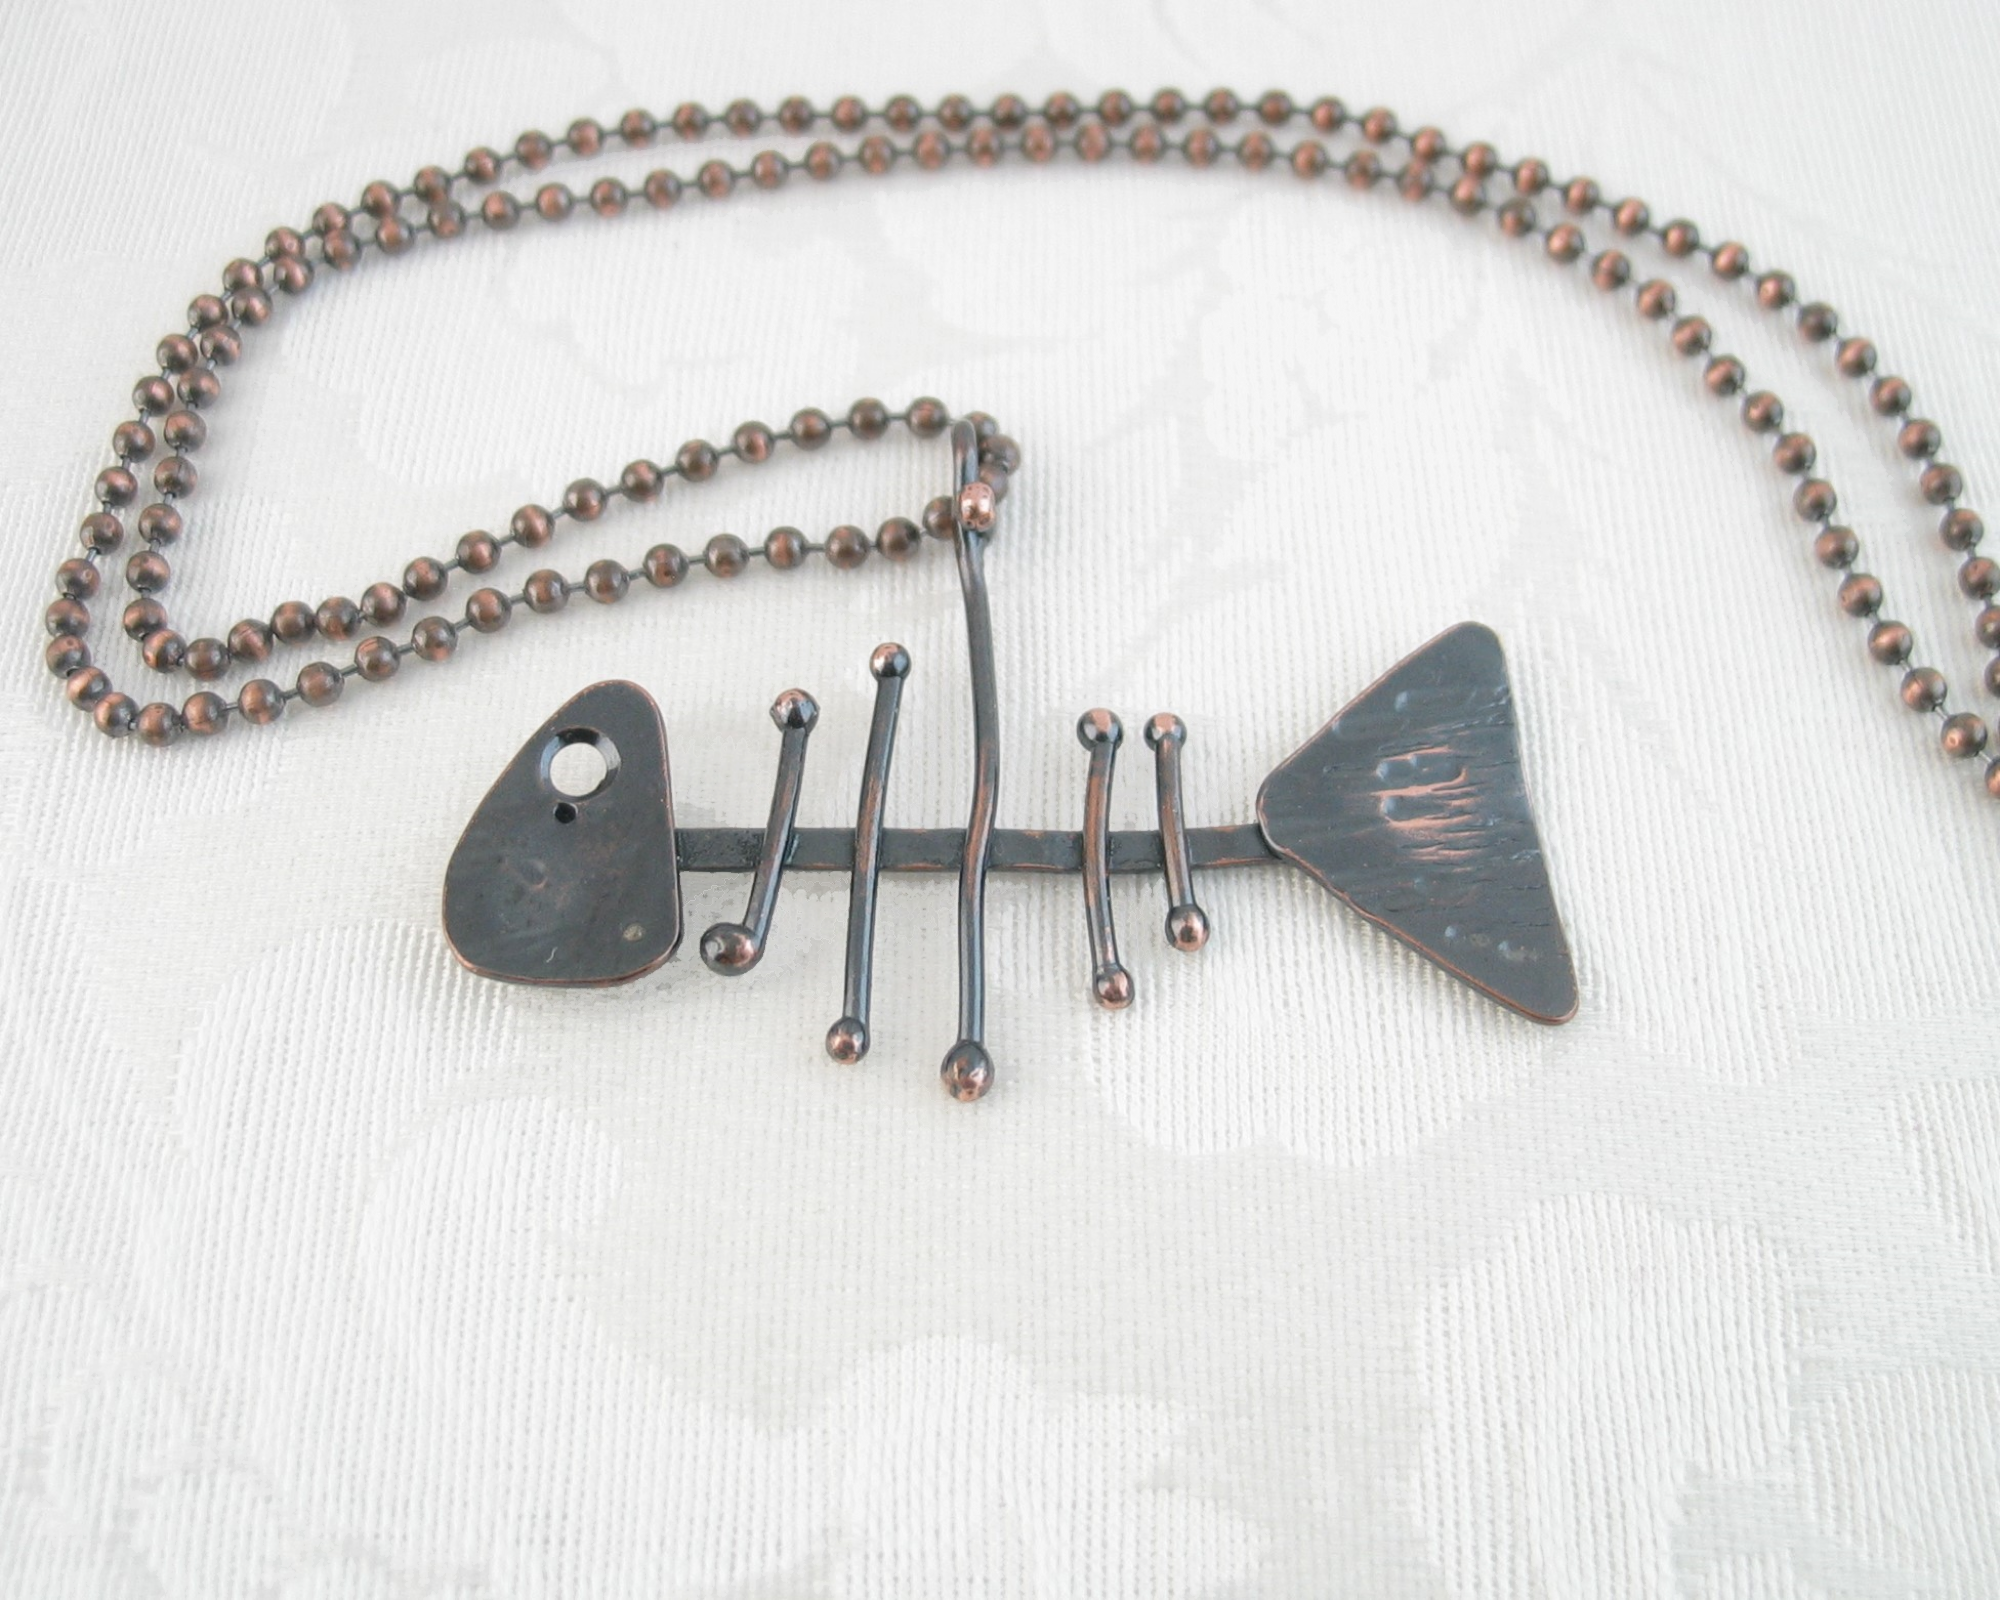 Solid Copper Fish Skeleton Pendant and Necklace